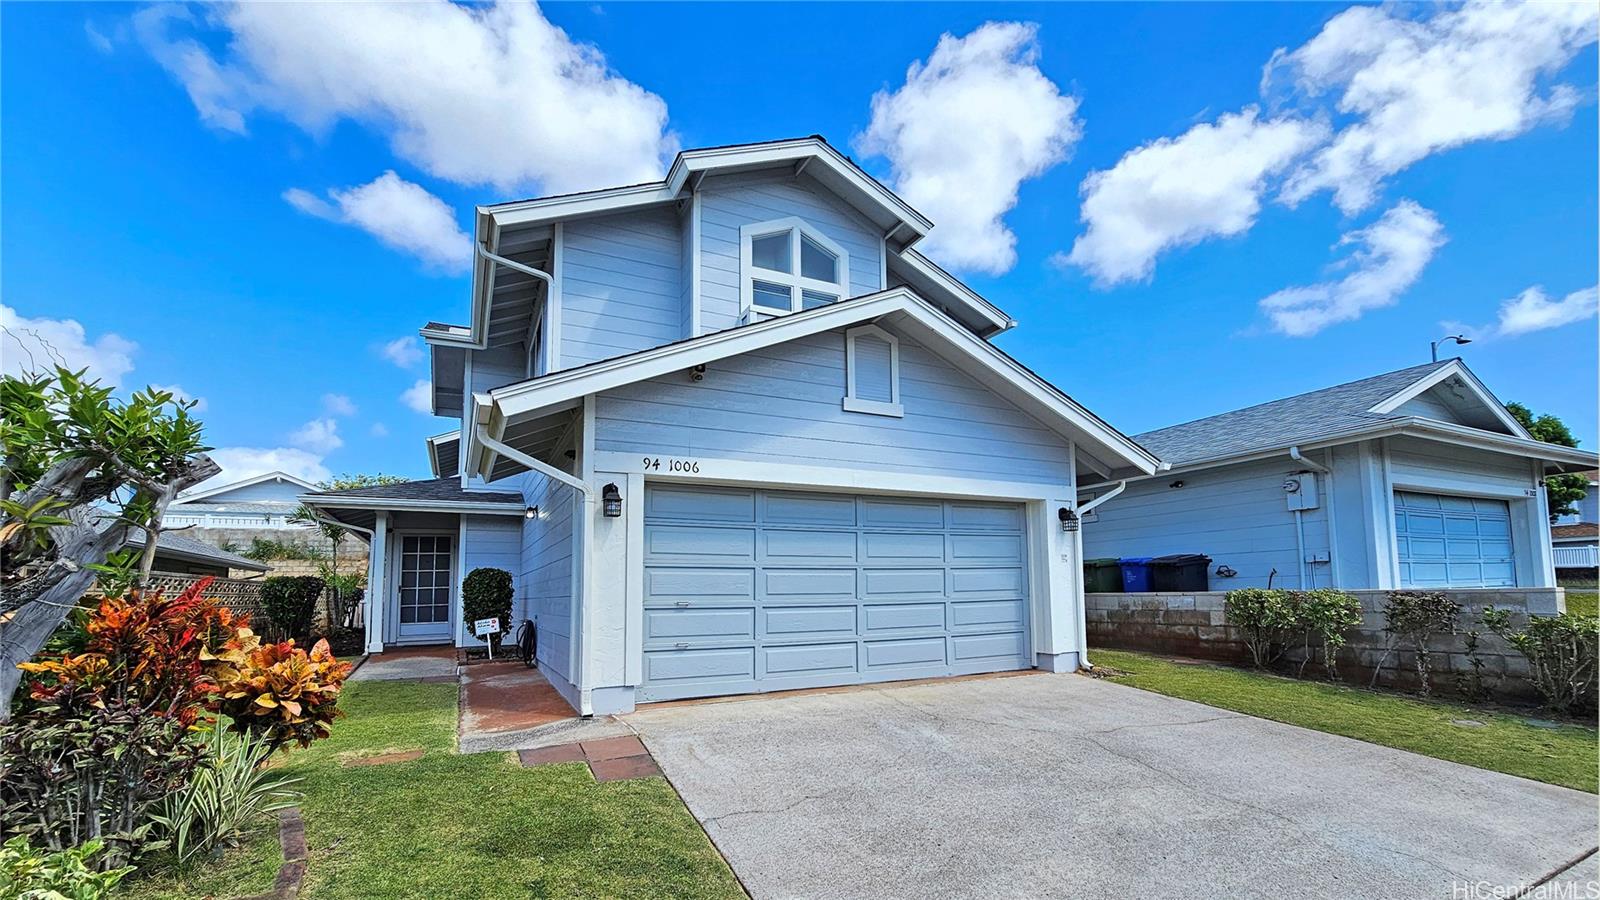 Beautiful, well-kept home in the quiet and convenient Waikele's neighborhood.